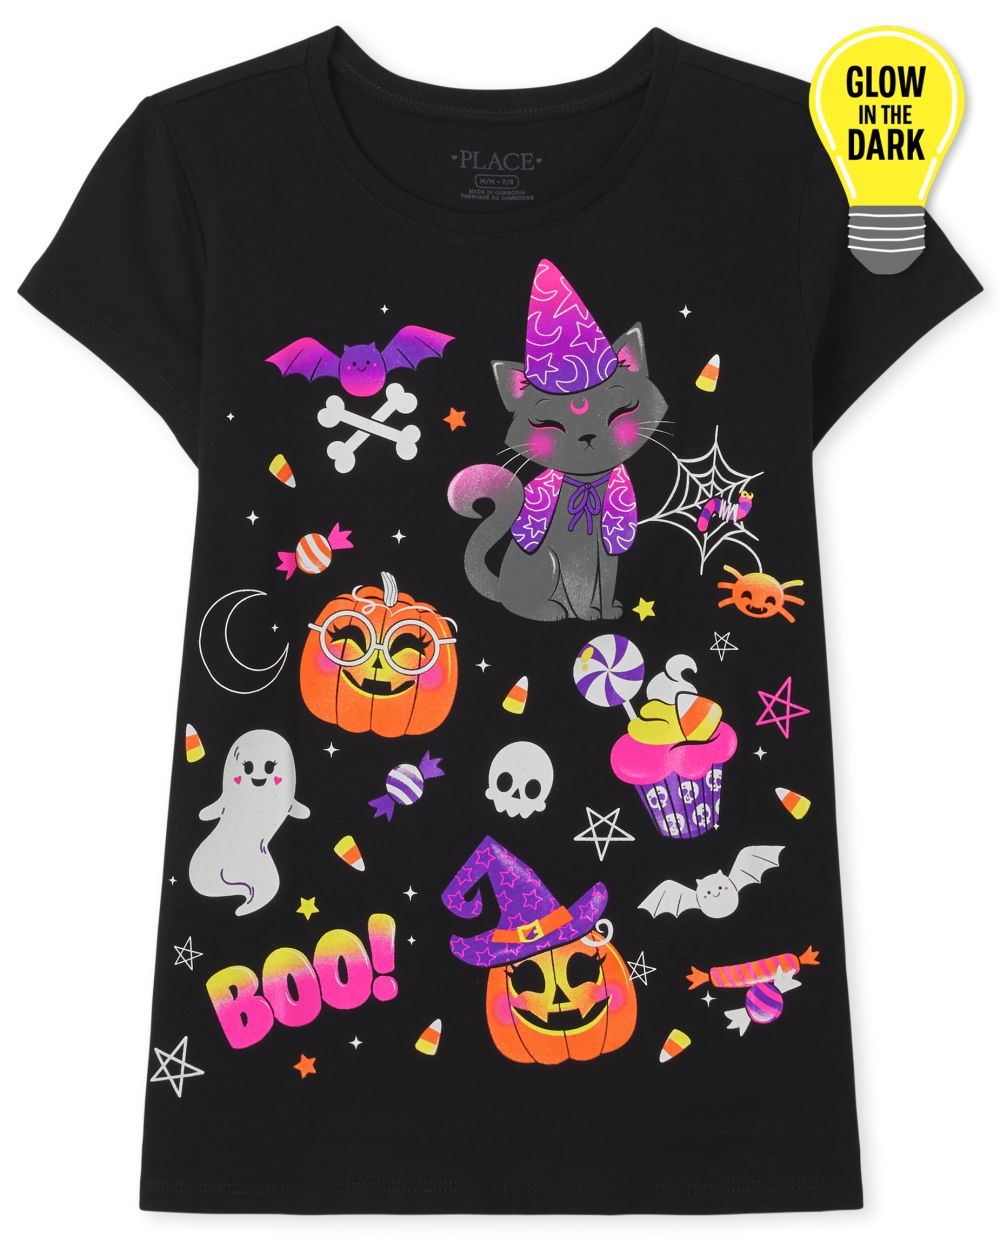 The Children's Place Girls Glow Doodle Graphic Tee - Black - Xl (14)